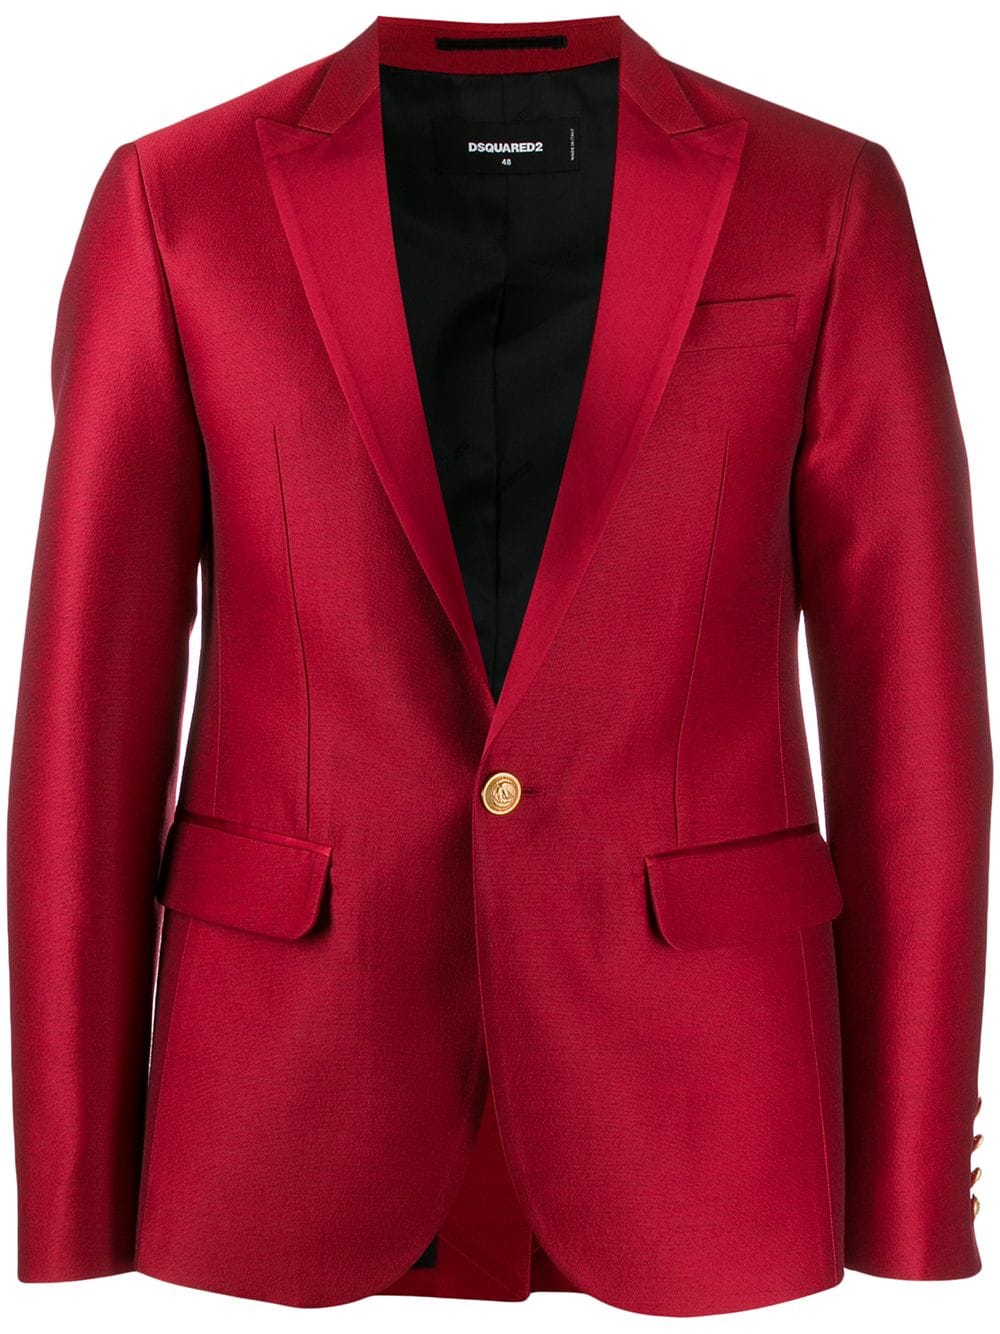 It’s A Date: Flirty Looks + Gifts for Valentine’s Day, men's red blazer jacket, DSquared2 tailored red blazer jacket